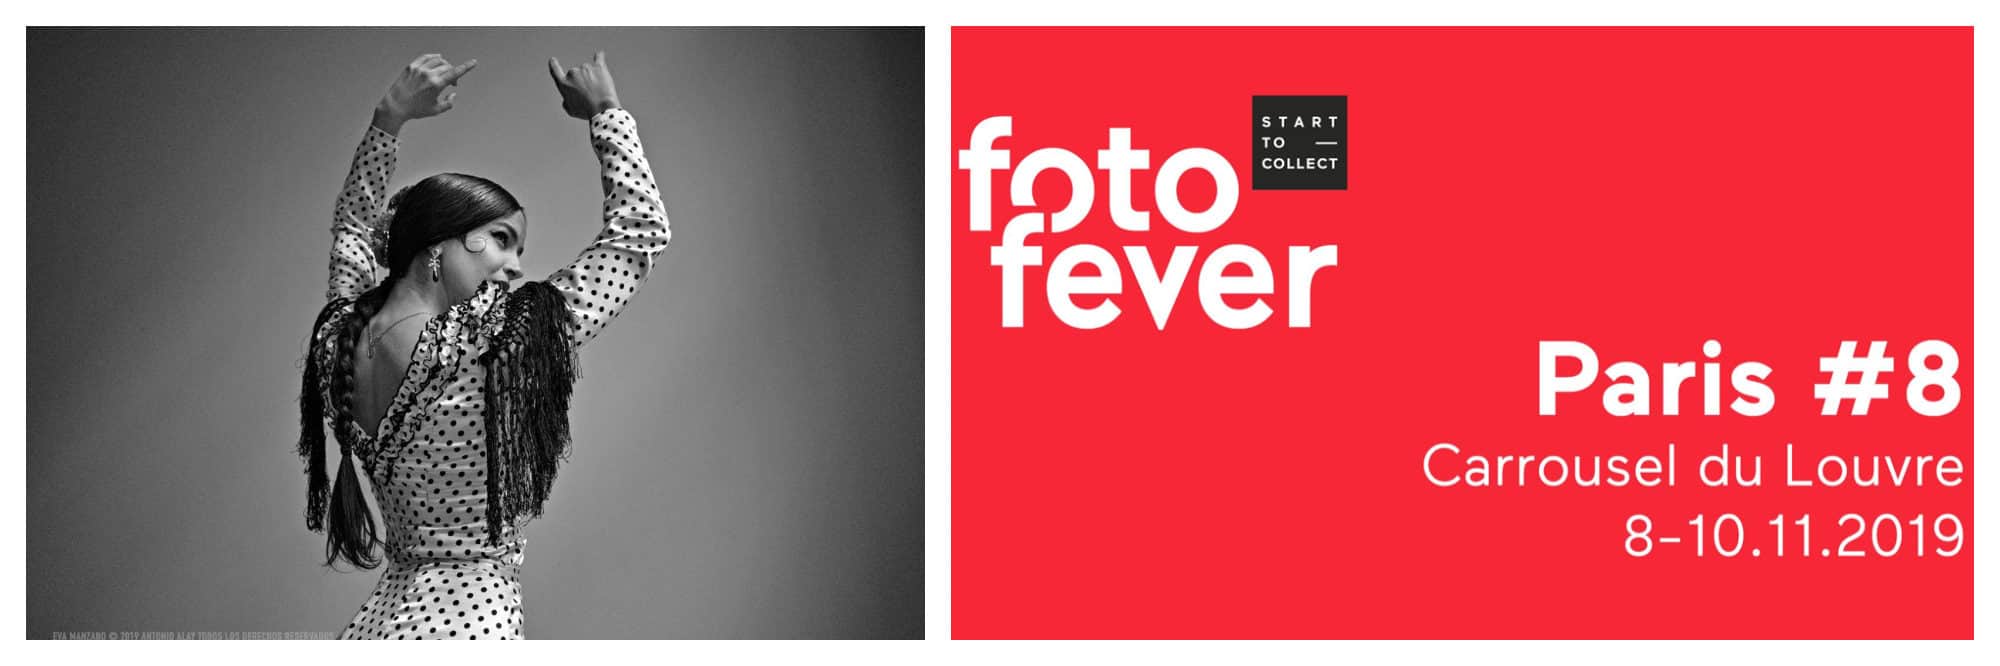 A black and white photo of a flamenco dancer with her arms raised from Paris Photo fair this November (left) and a rest poster for Fotofever (right).